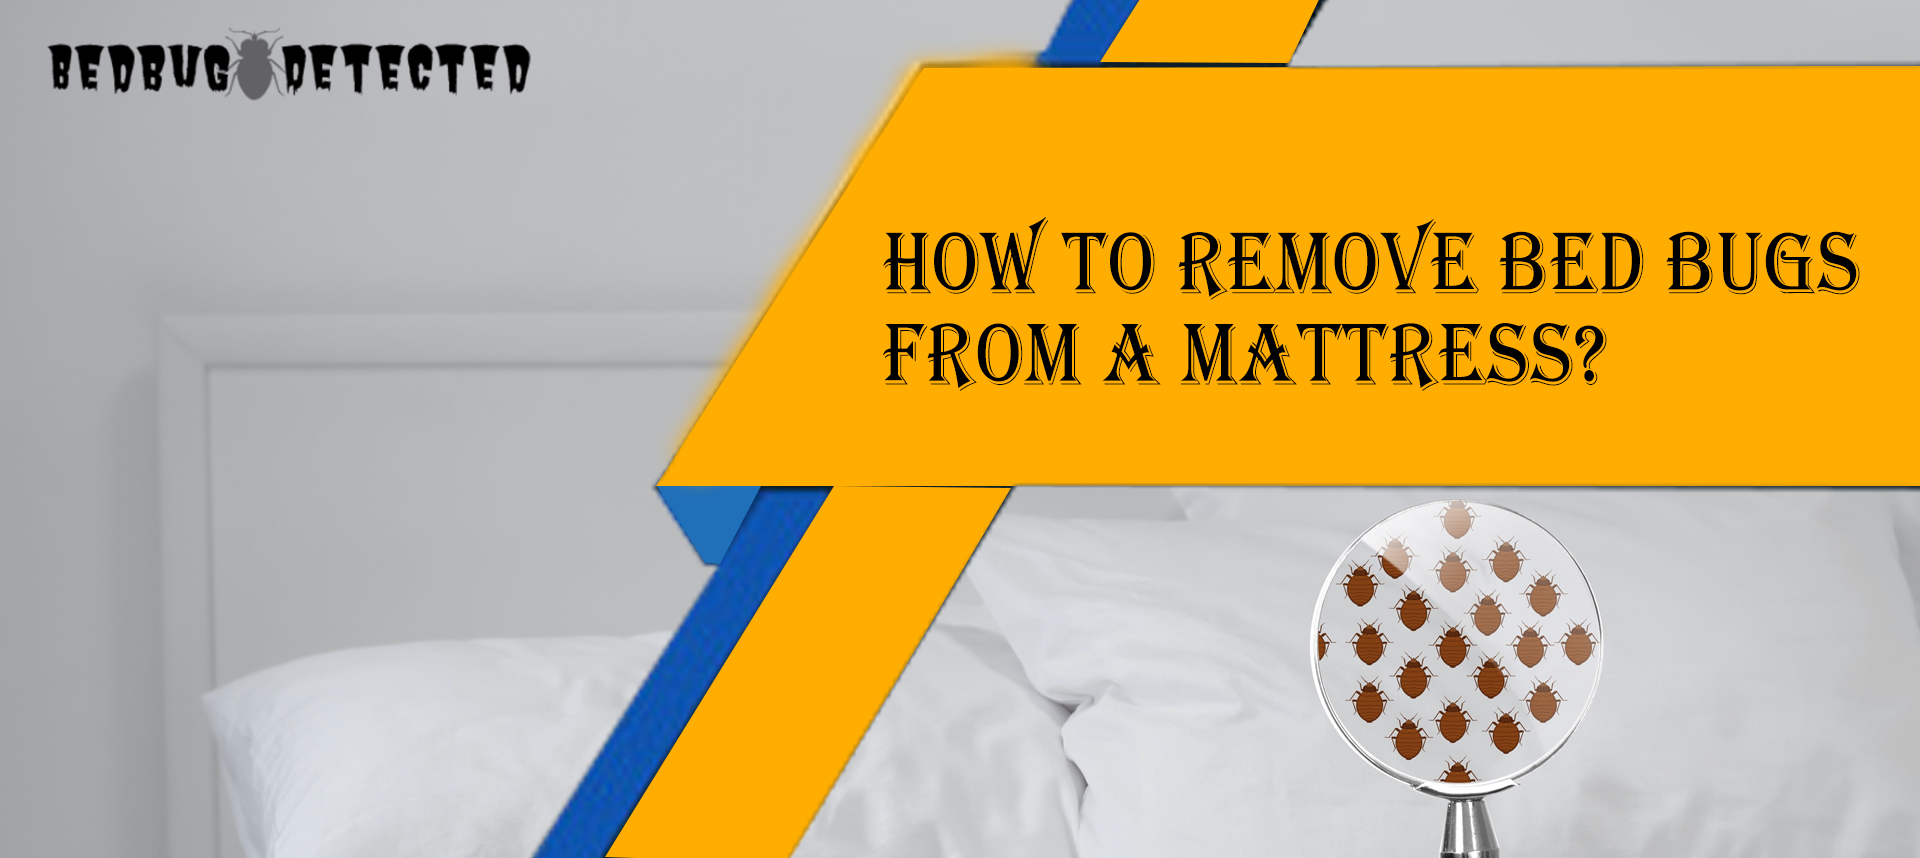 get-rid-of-bed-bugs-in-mattress